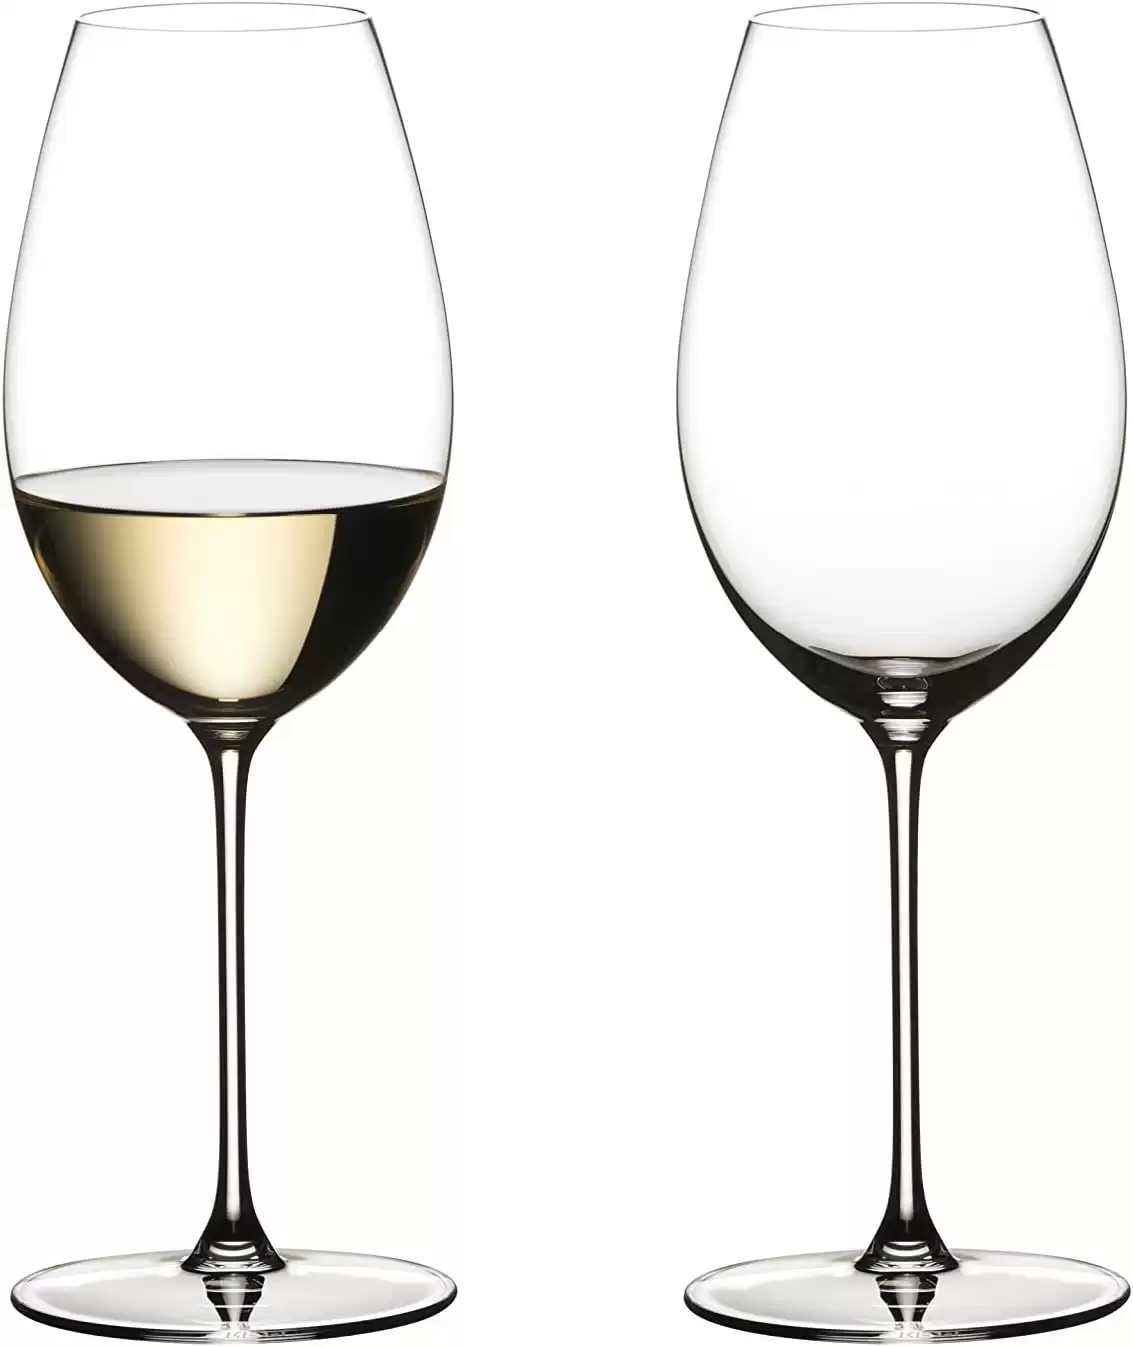 Wine Central: 12+ Wine Glass Types + Tips + Brands - Buying Guides